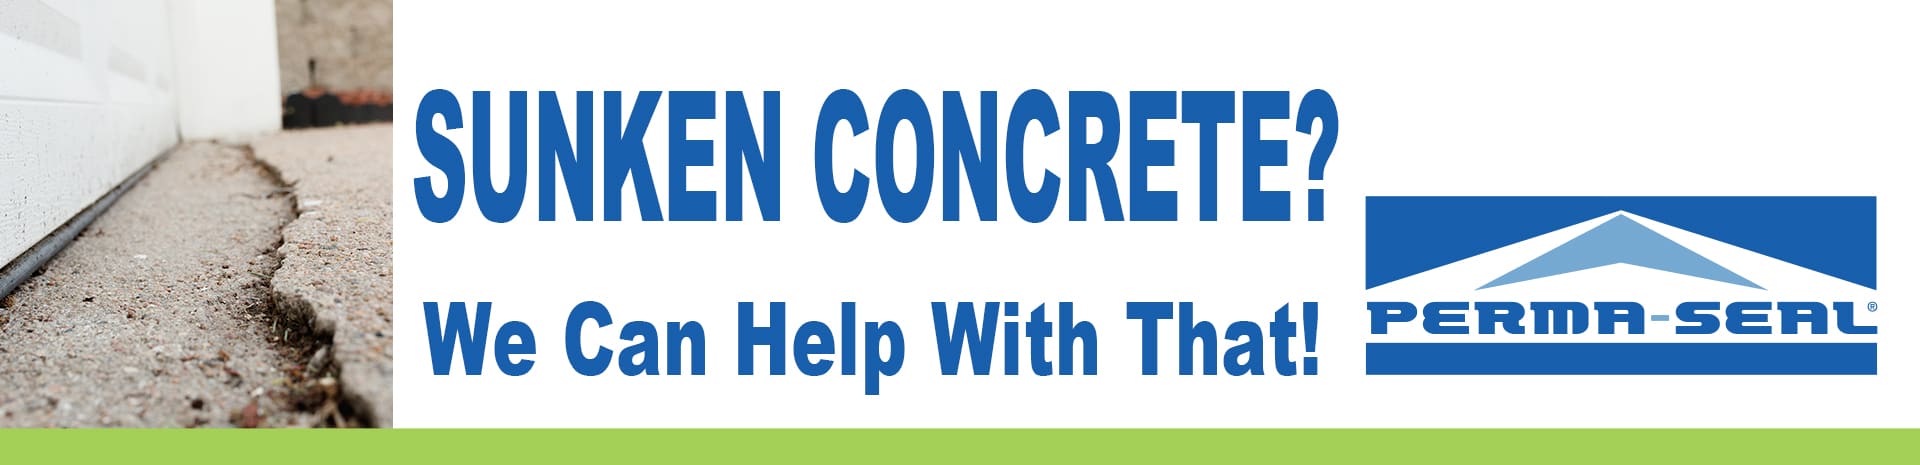 Sunken Concrete? Perma-Seal Can Help With That